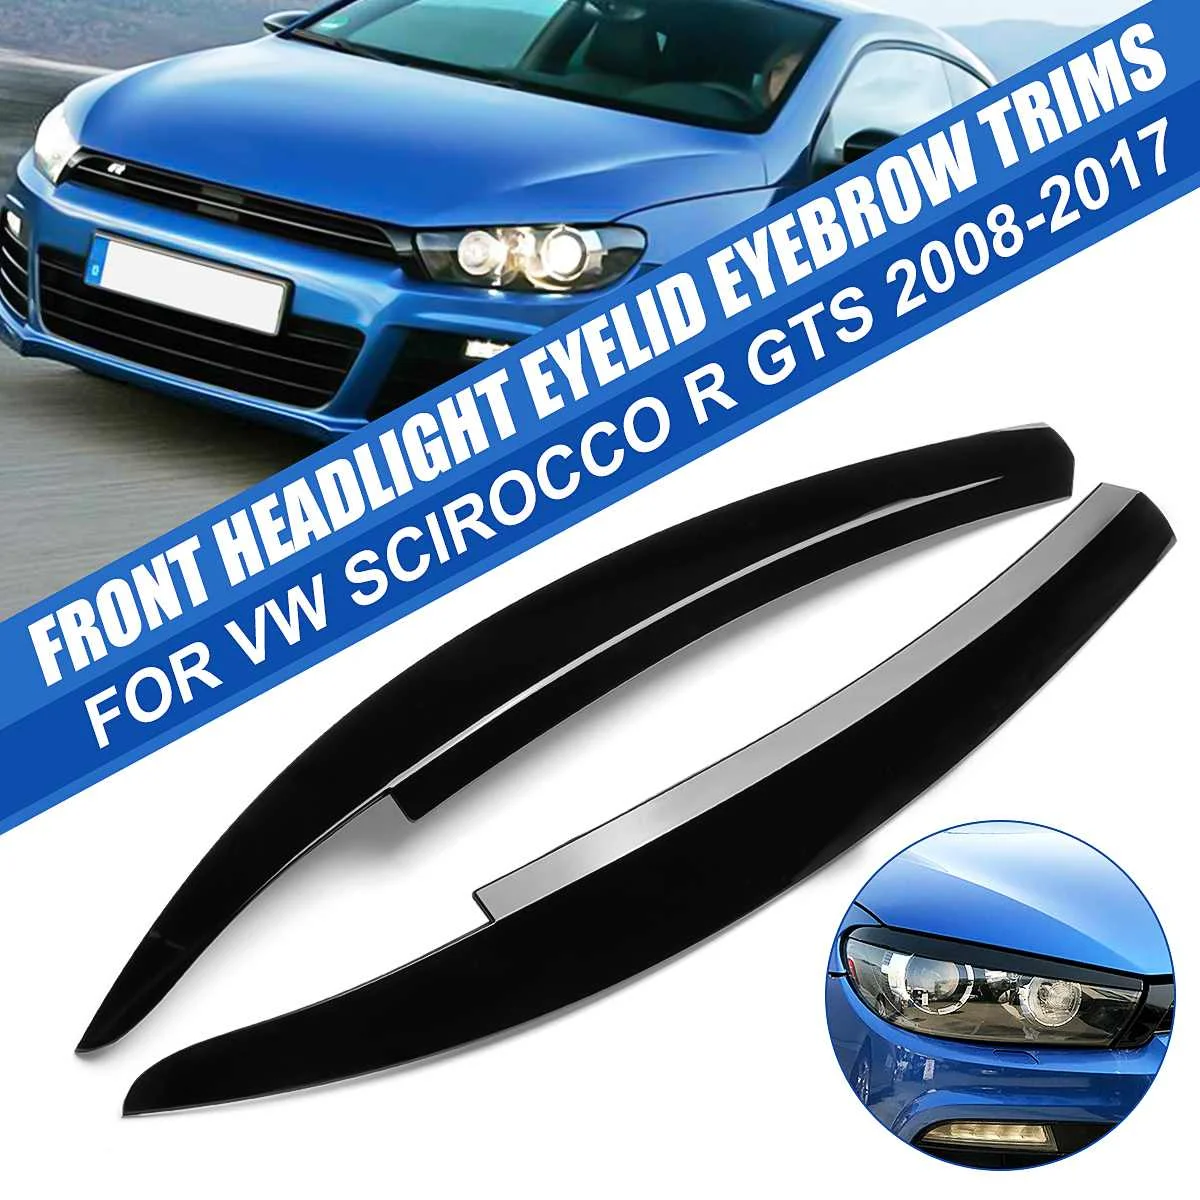 Head light spoilers Super11Six Headlights Eyelids Eyebrows Trims Compatible With VW Scirocco R GTS 2008-2017 Head Light Lamp Cover Sticker 